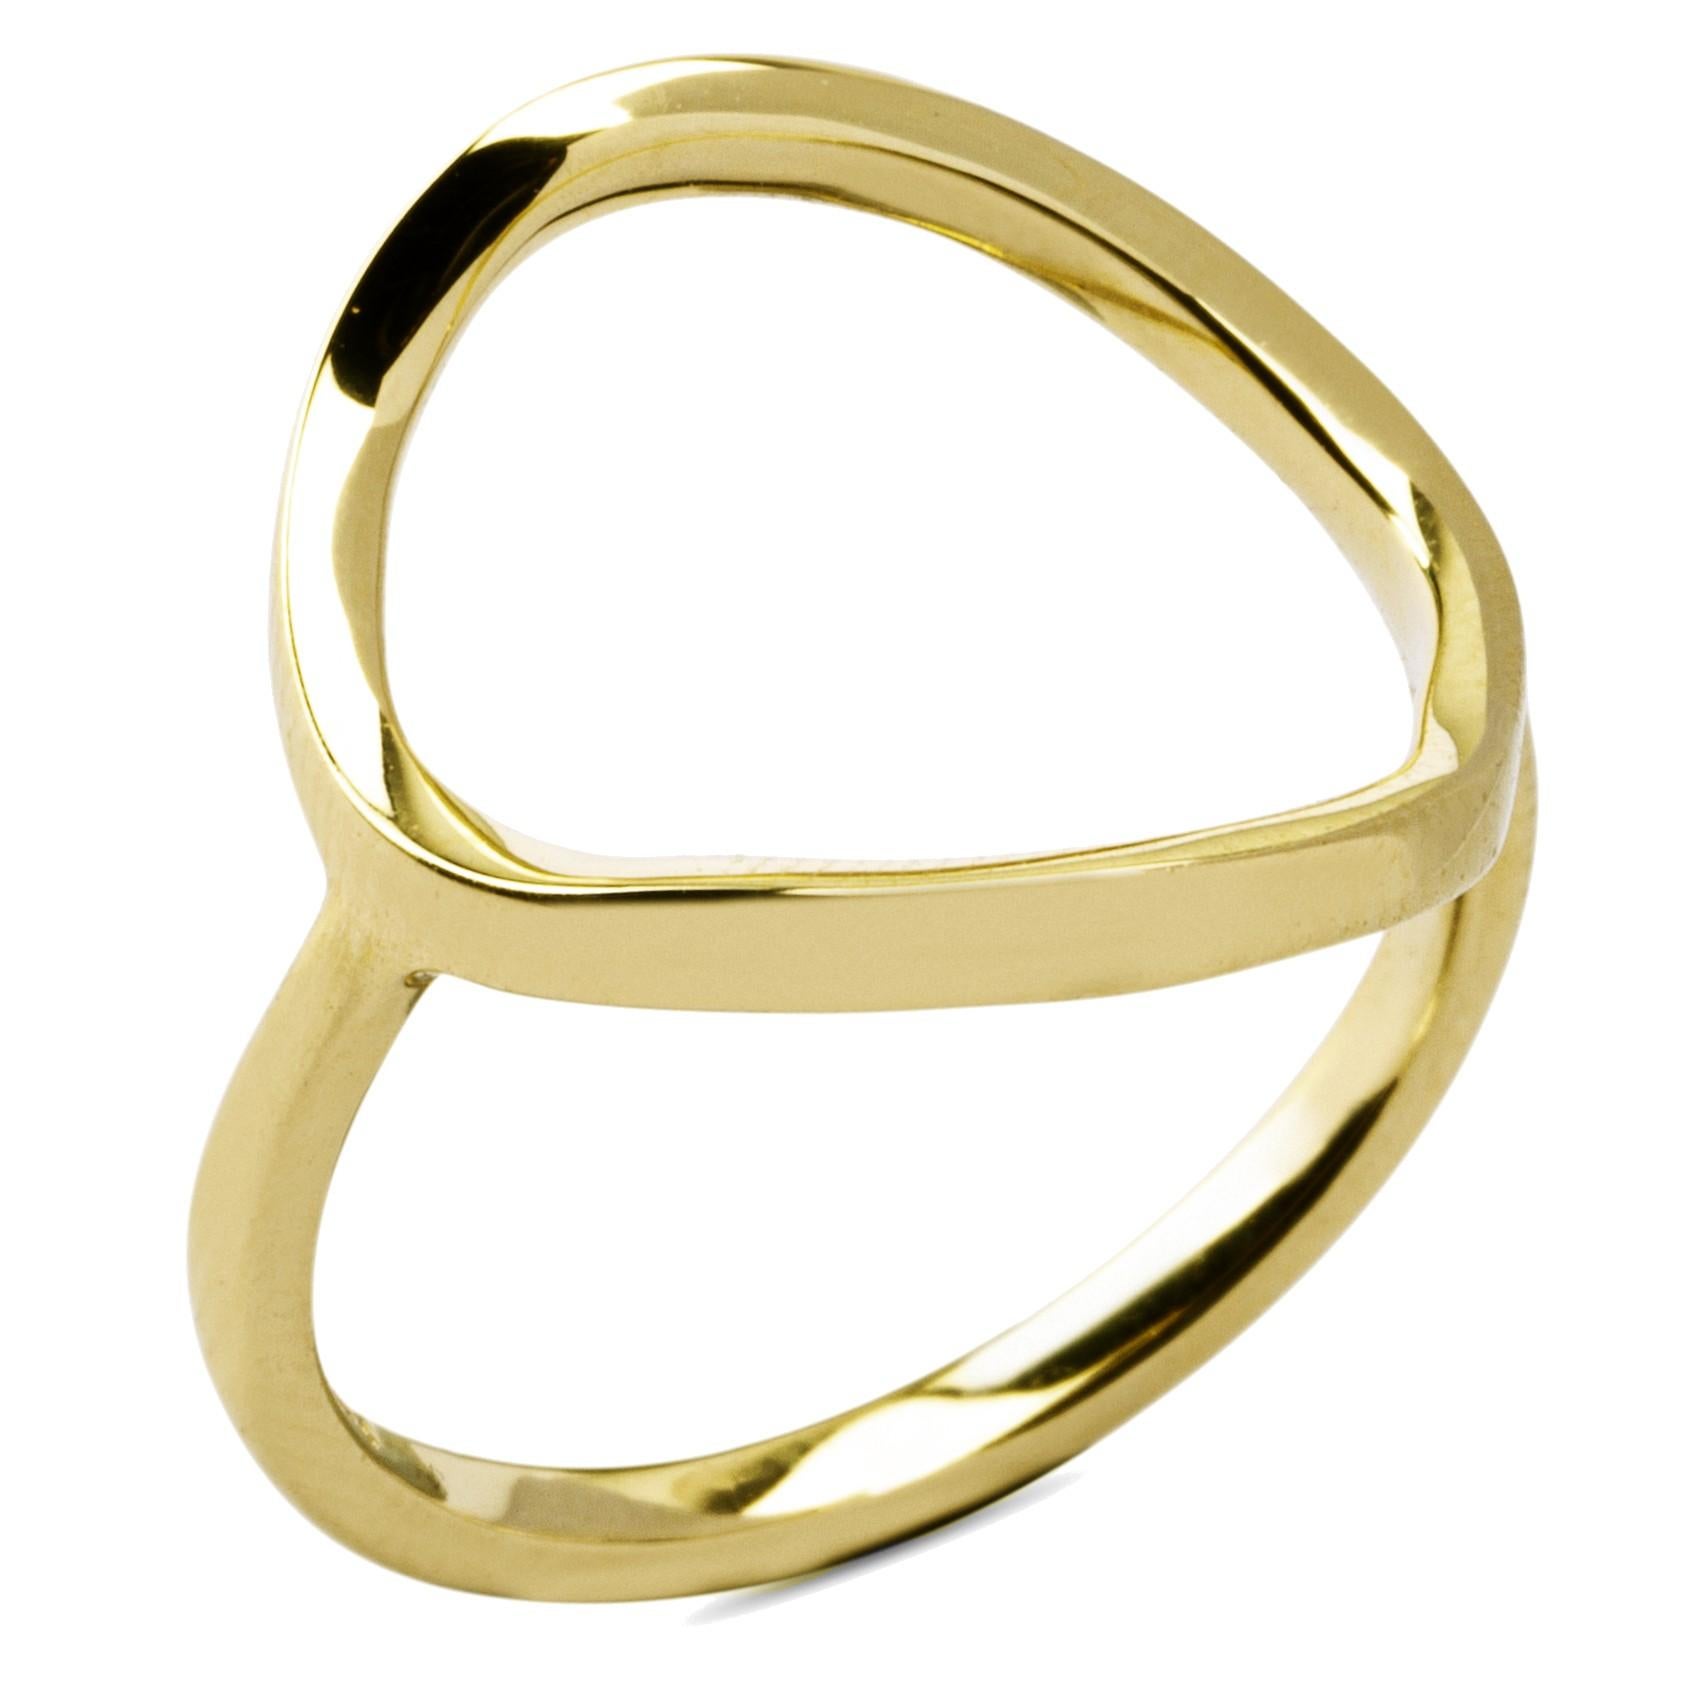 gold ring with circle with line through it